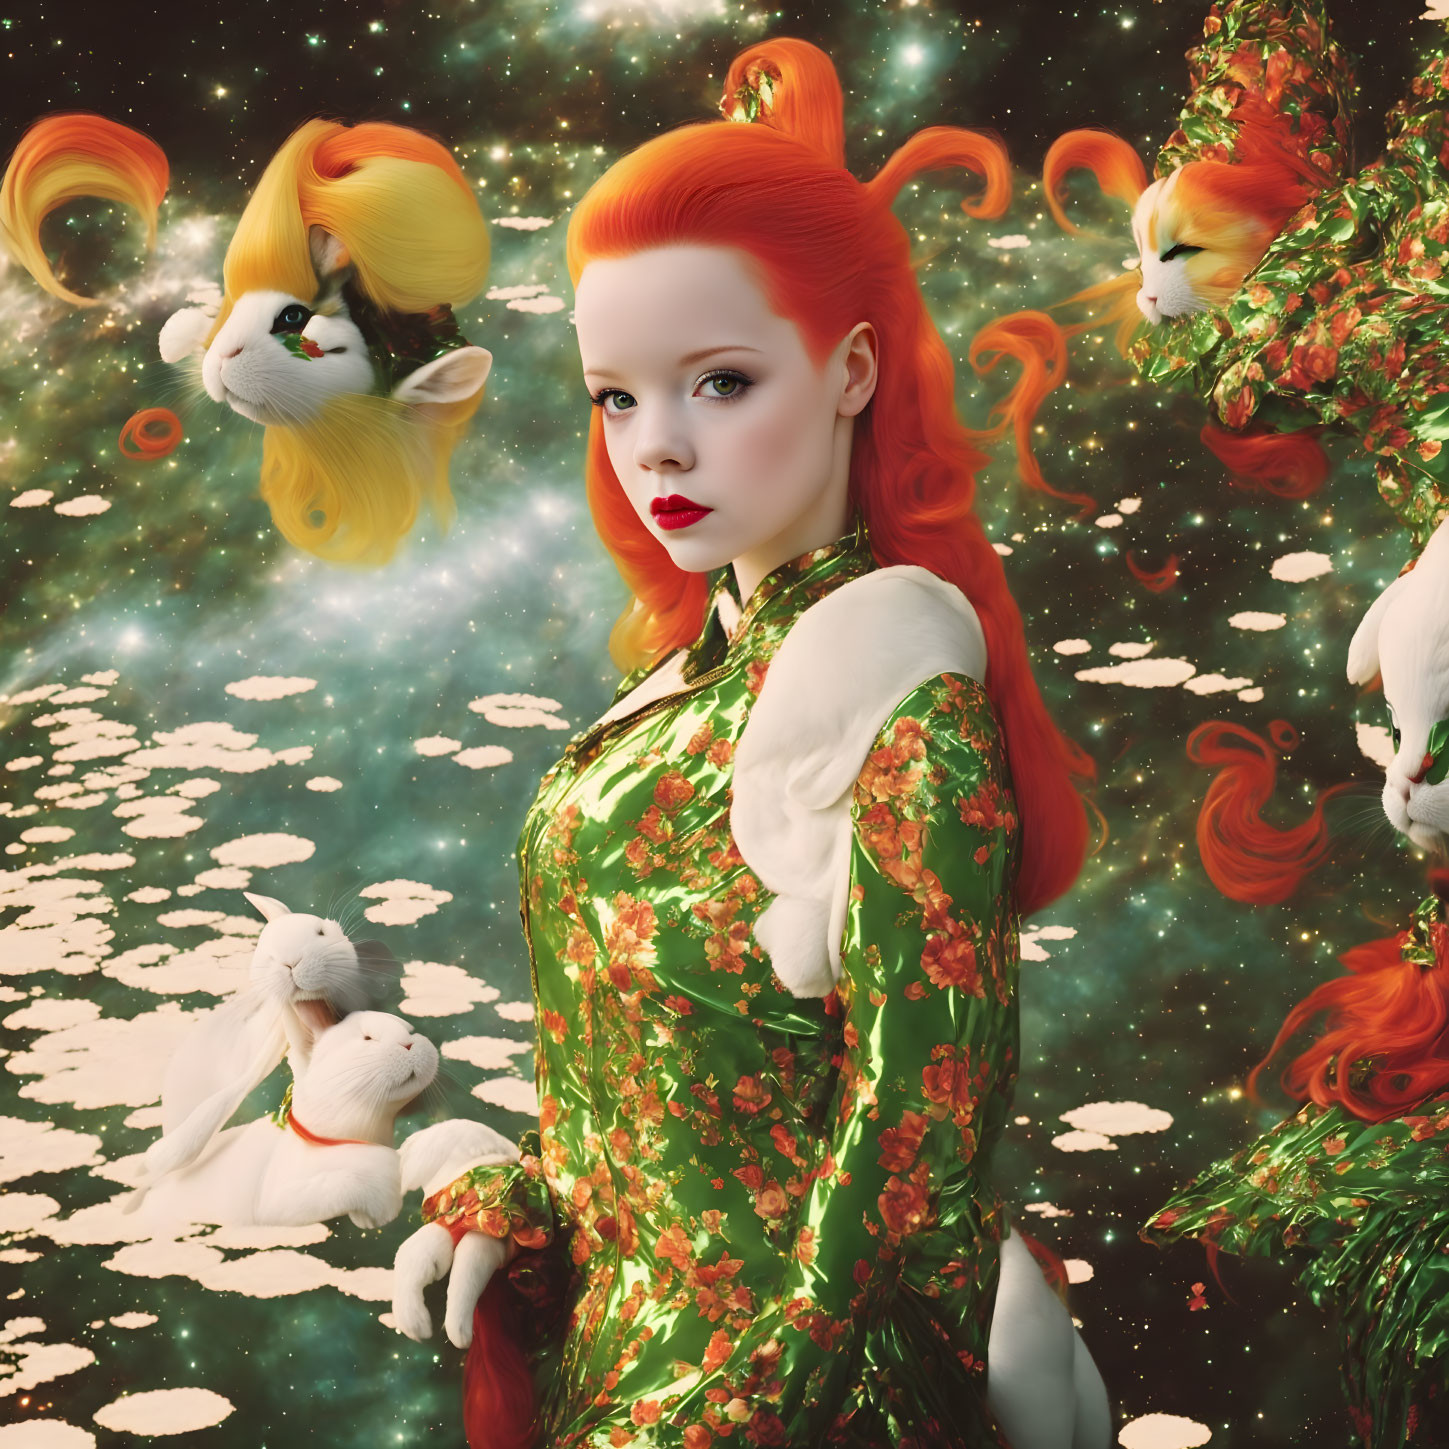 Red-haired woman in green dress with flying fish and rabbits under starry sky